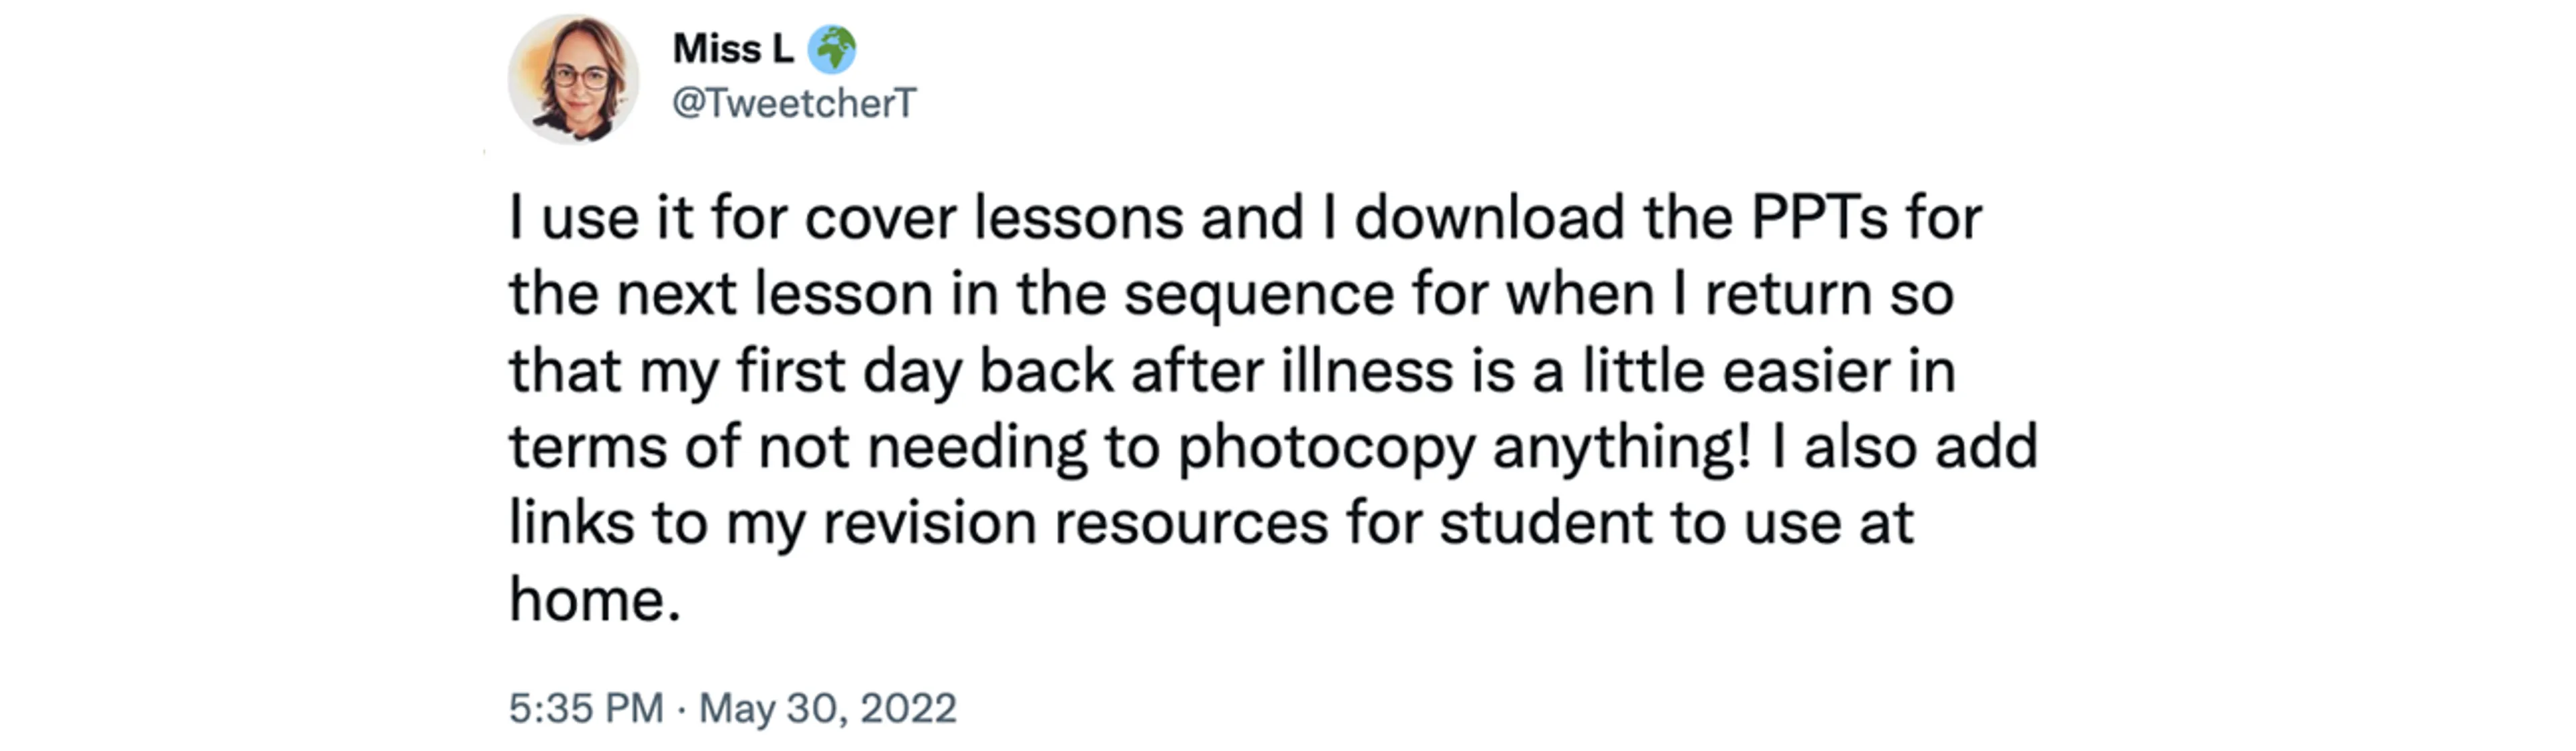 Screenshot of tweet from @TweetcherT at 5:35pm 30 May 2022, saying "I use it for cover lessons and I download the PPTs for the next lesson in the sequence for when I return so that my first day back after illness is a little easier in terms of not needing to photocopy anything! I also add links to my revision resources for student to use at home."